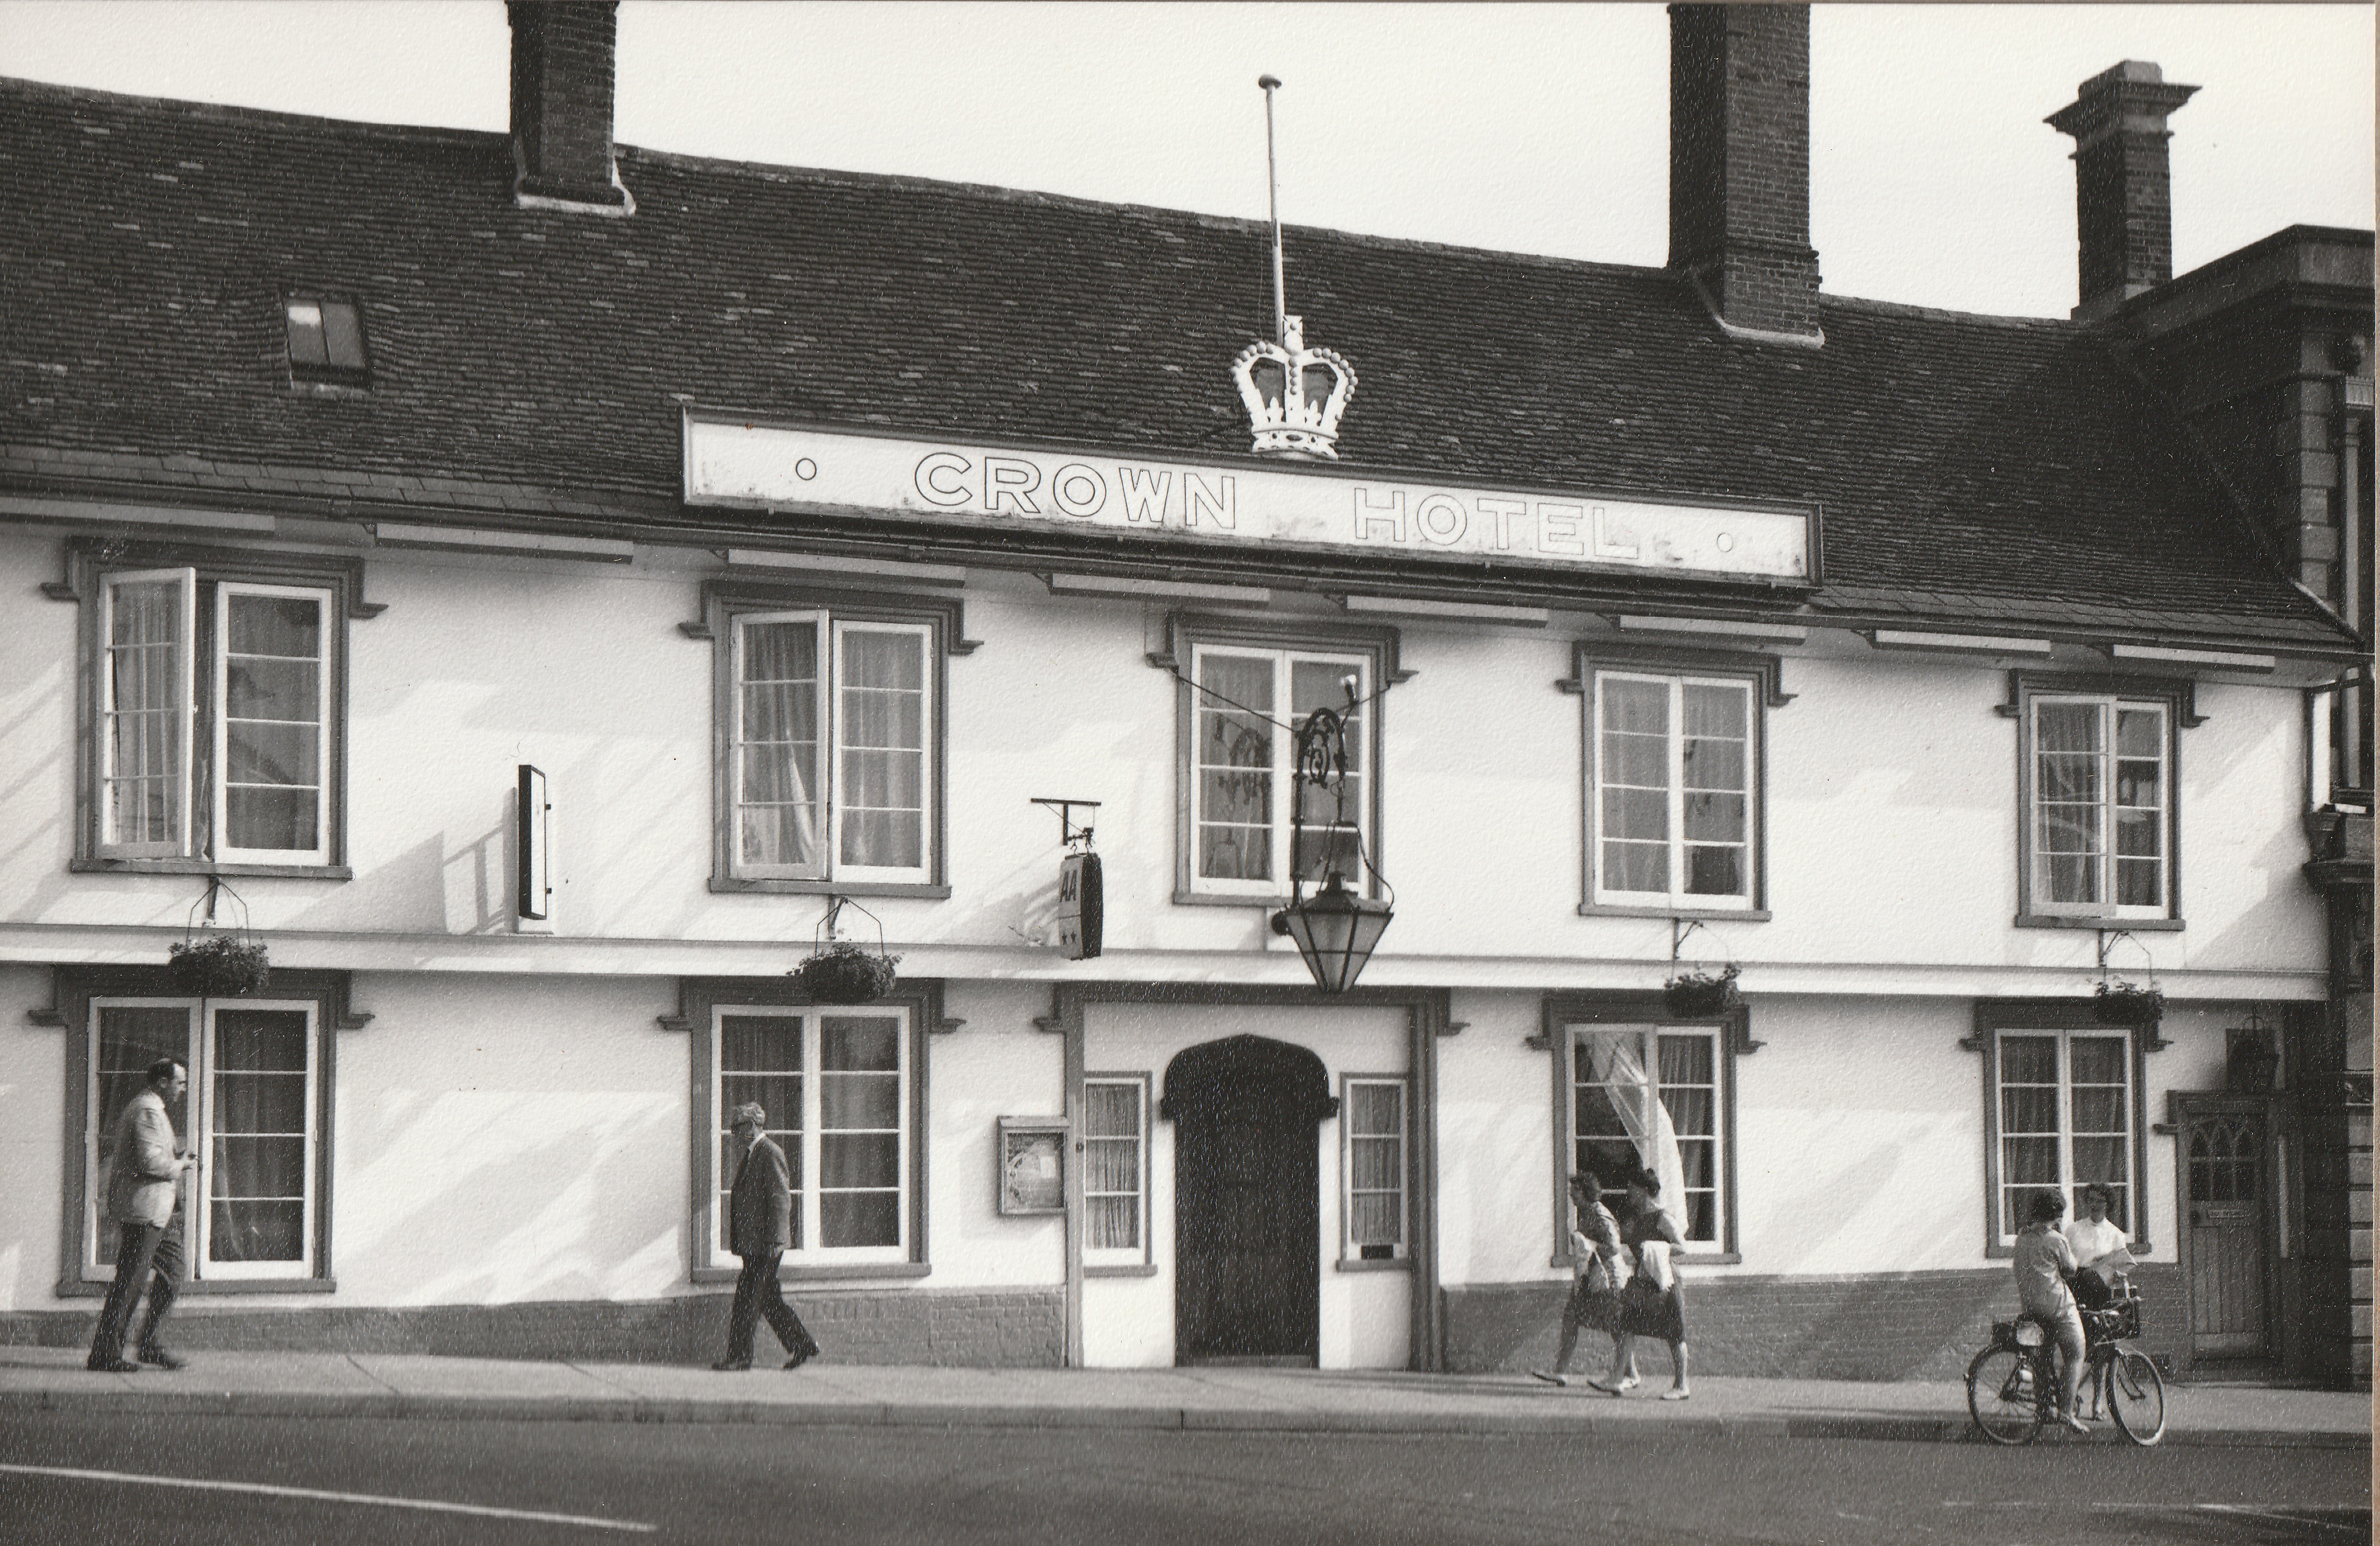 The Crown Hotel in 1970